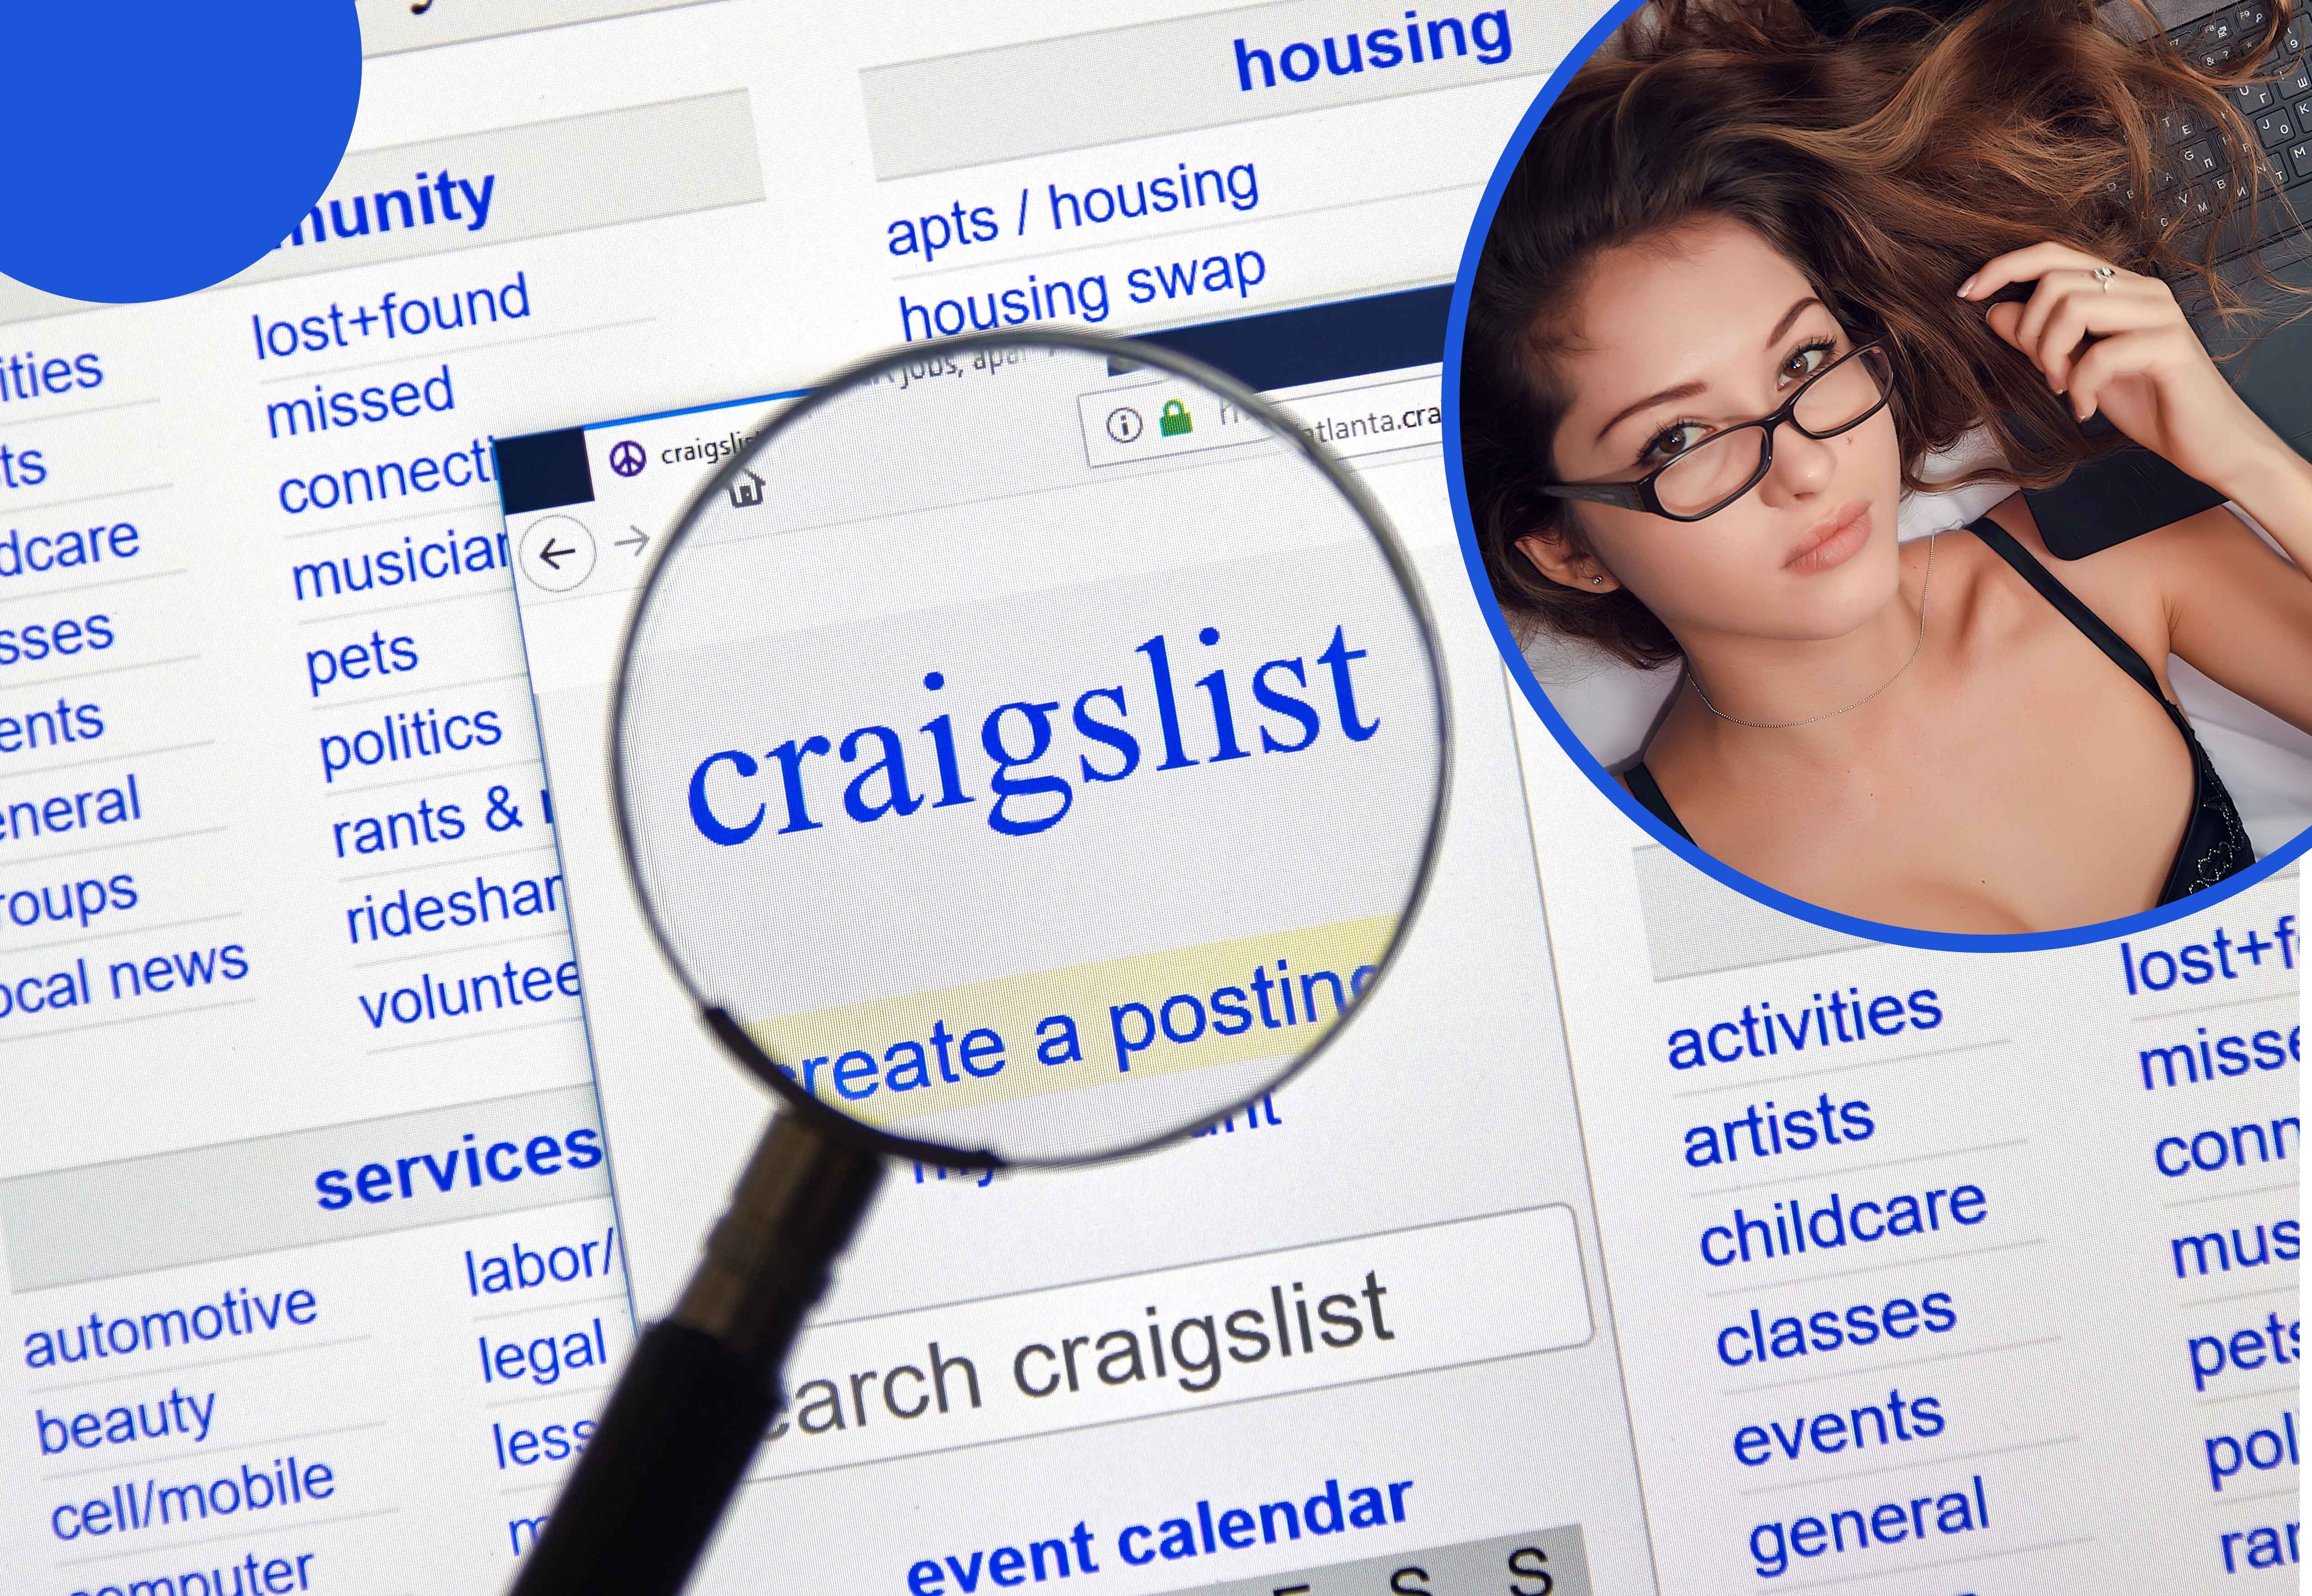 Where To Find Casual Encounters After Craigslist Personals Is Gone?